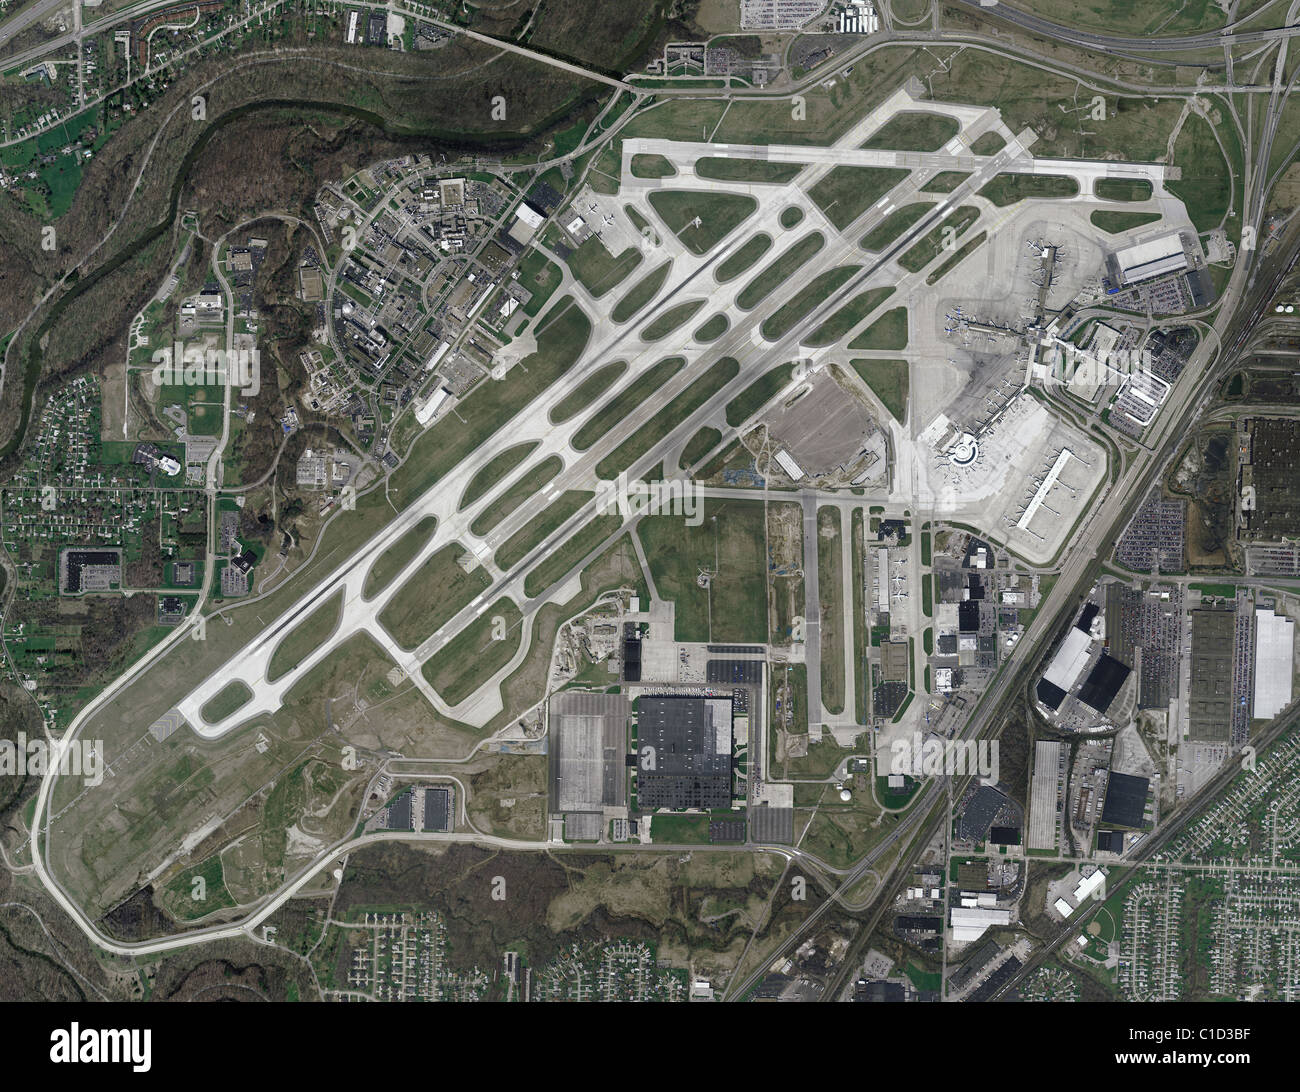 cle airport map